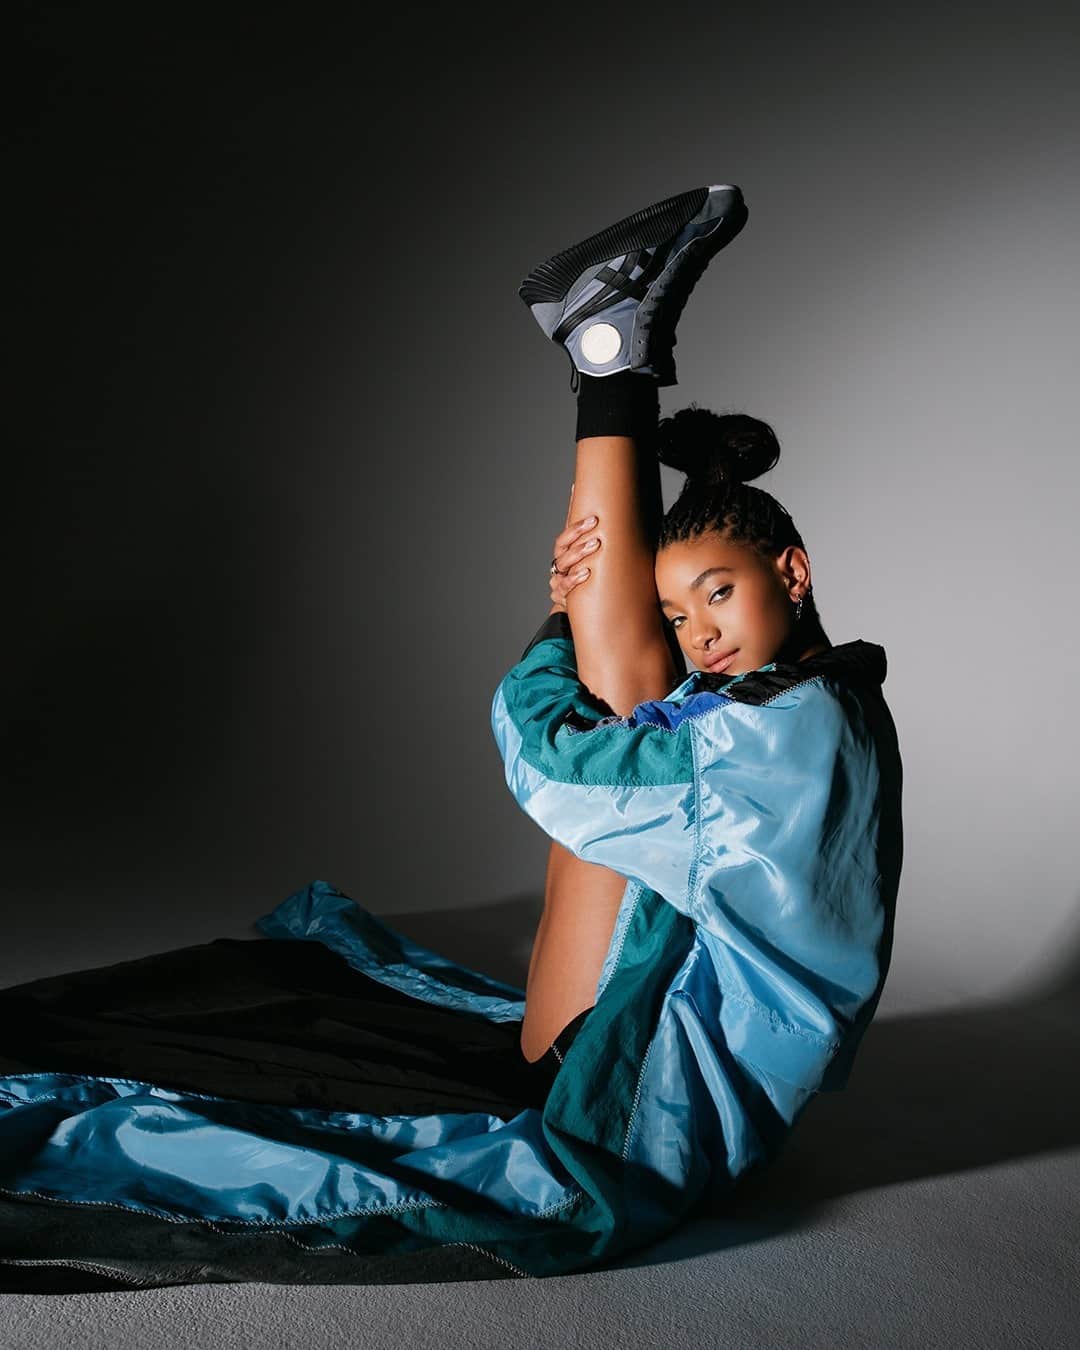 Onitsuka Tigerのインスタグラム：「The SS21 brand campaign features Willow Smith as brand ambassador, continuing on from last season.   The full line-up of these special campaign images is now available on our official website. @willowsmith @westbrook #WillowSmith #BrandAmbassador #OnitsukaTiger #OnitsukaTigerSS21」